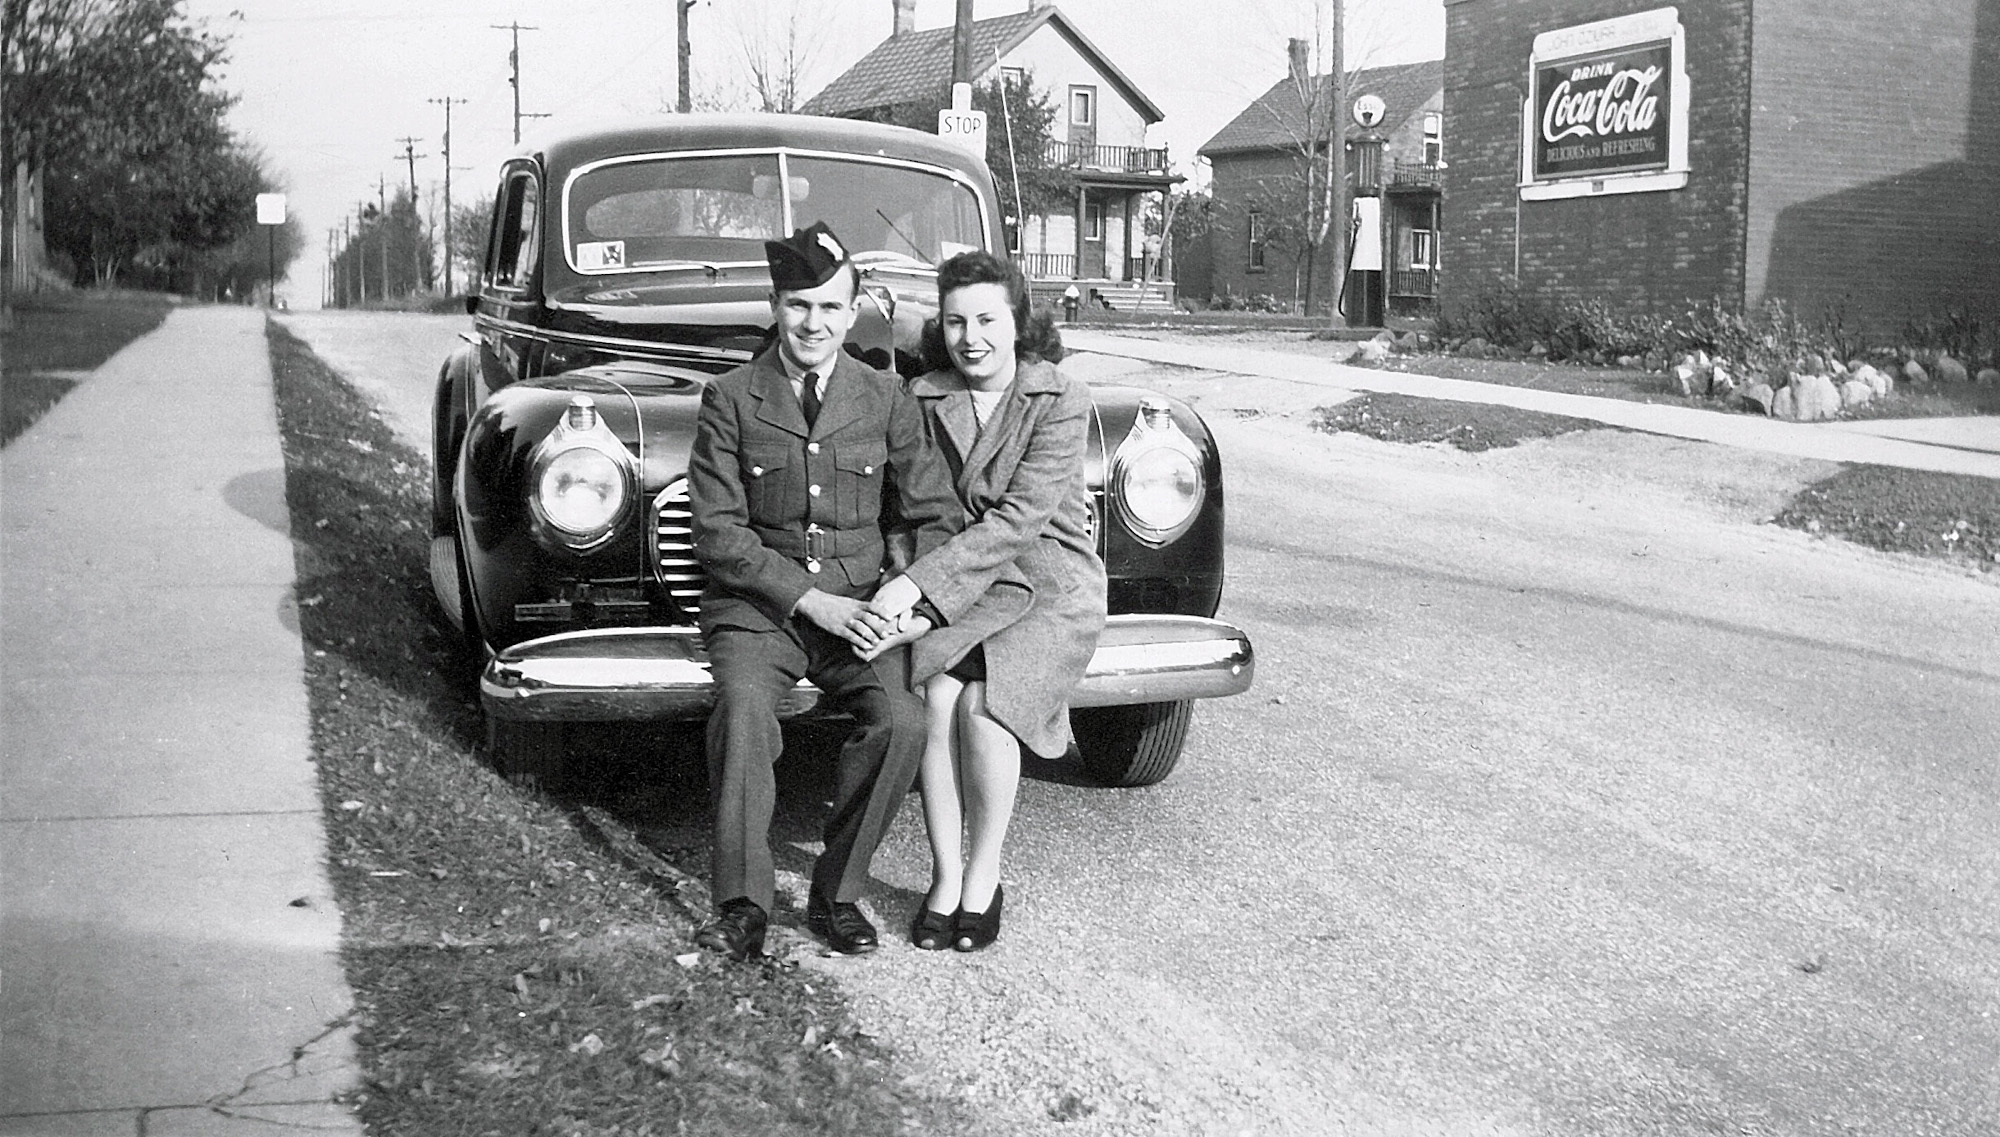 Photo of Frank Modrowski and fiancee Jen Reidel on a 1941 Plymouth Deluxe. The photo was taken in Kitchener, Ontario during the summer of 1941 while Frank was on leave with the Canadian Army. 

The photo was taken by a family member with a 35 mm camera. Frank tells me that the Plymouth was his father's, and the photo was taken in front of his parent's house. He also says that the Plymouth was a dark blue, and his uniform was a light tan -- standard summer issue for a Canadian private.

In the background is a one-pump Esso service station where gasoline was sold at 14 cents a gallon. The Coca-Cola sign displays the name of the service station owner; John Dziura. View full size.